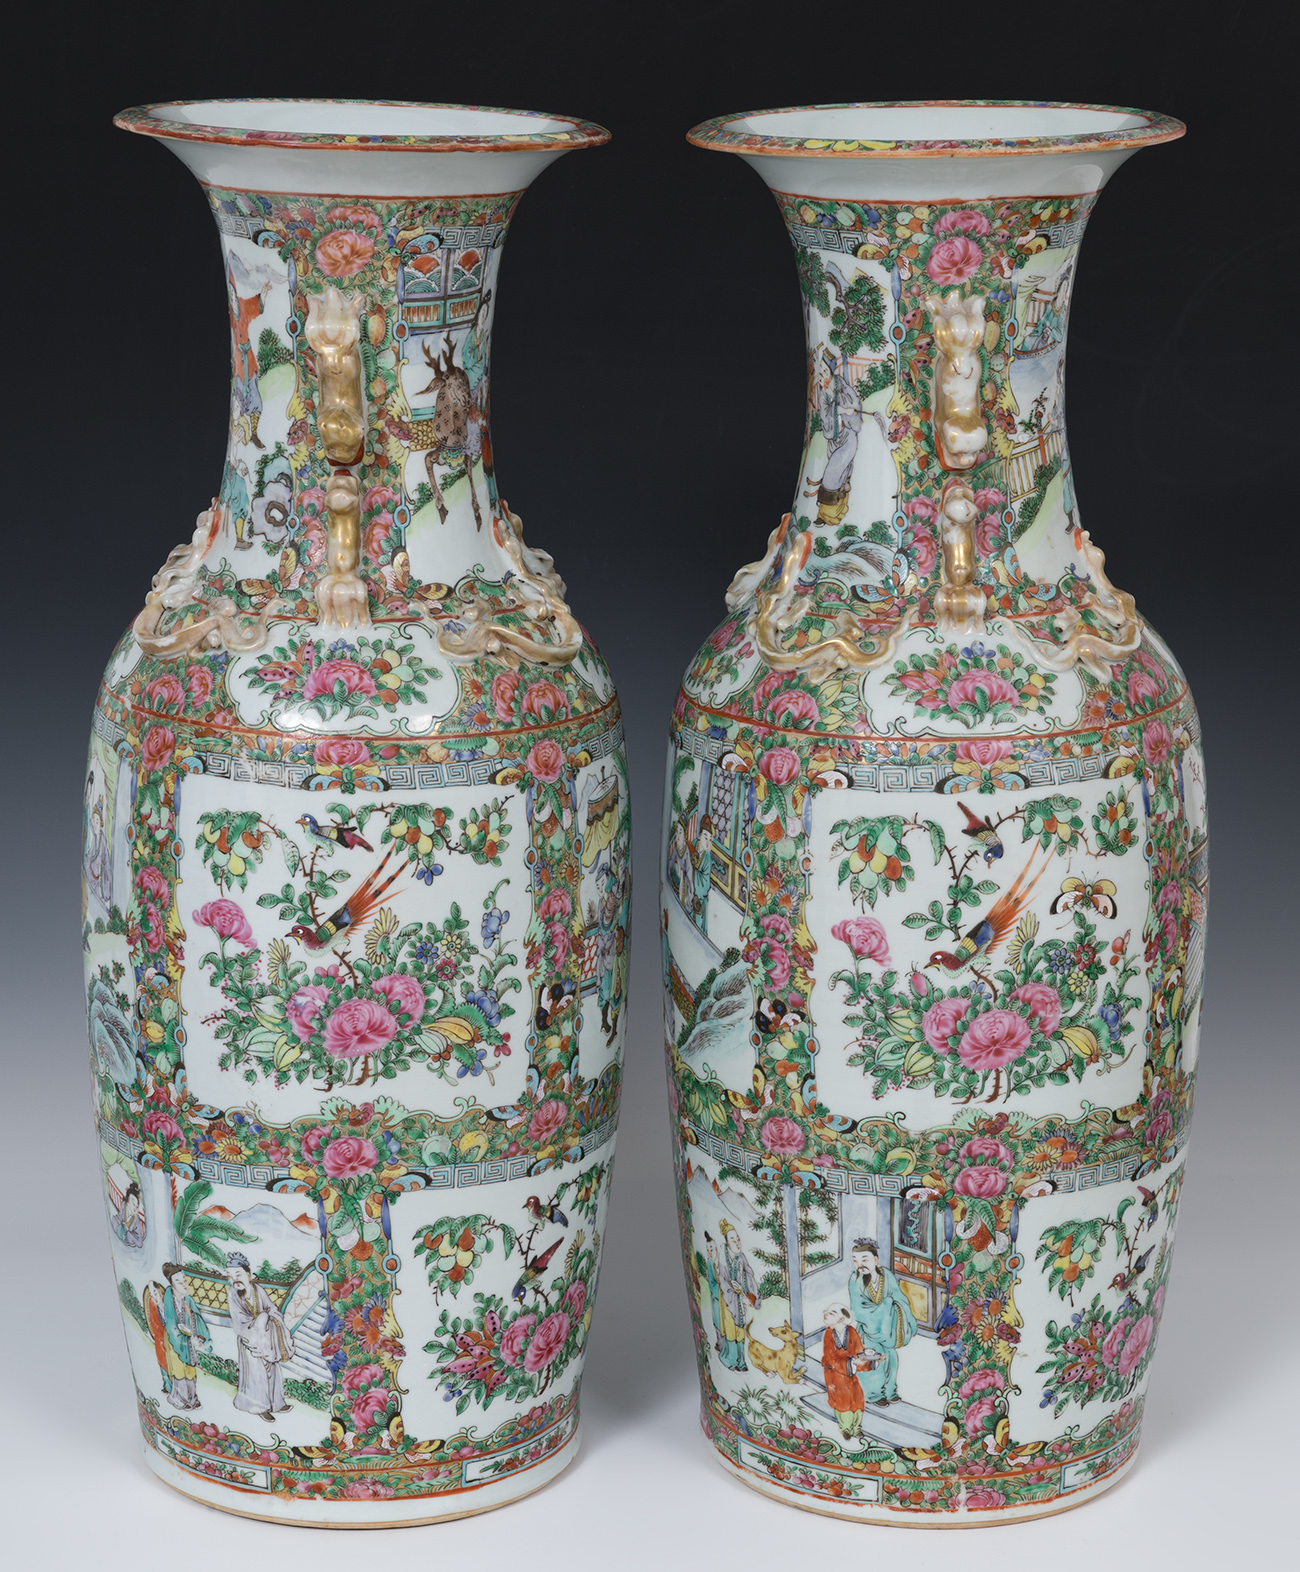 Pair of vases after models of the Green Family; Canton, China 19th century.Enamelled porcelain.The - Image 5 of 7